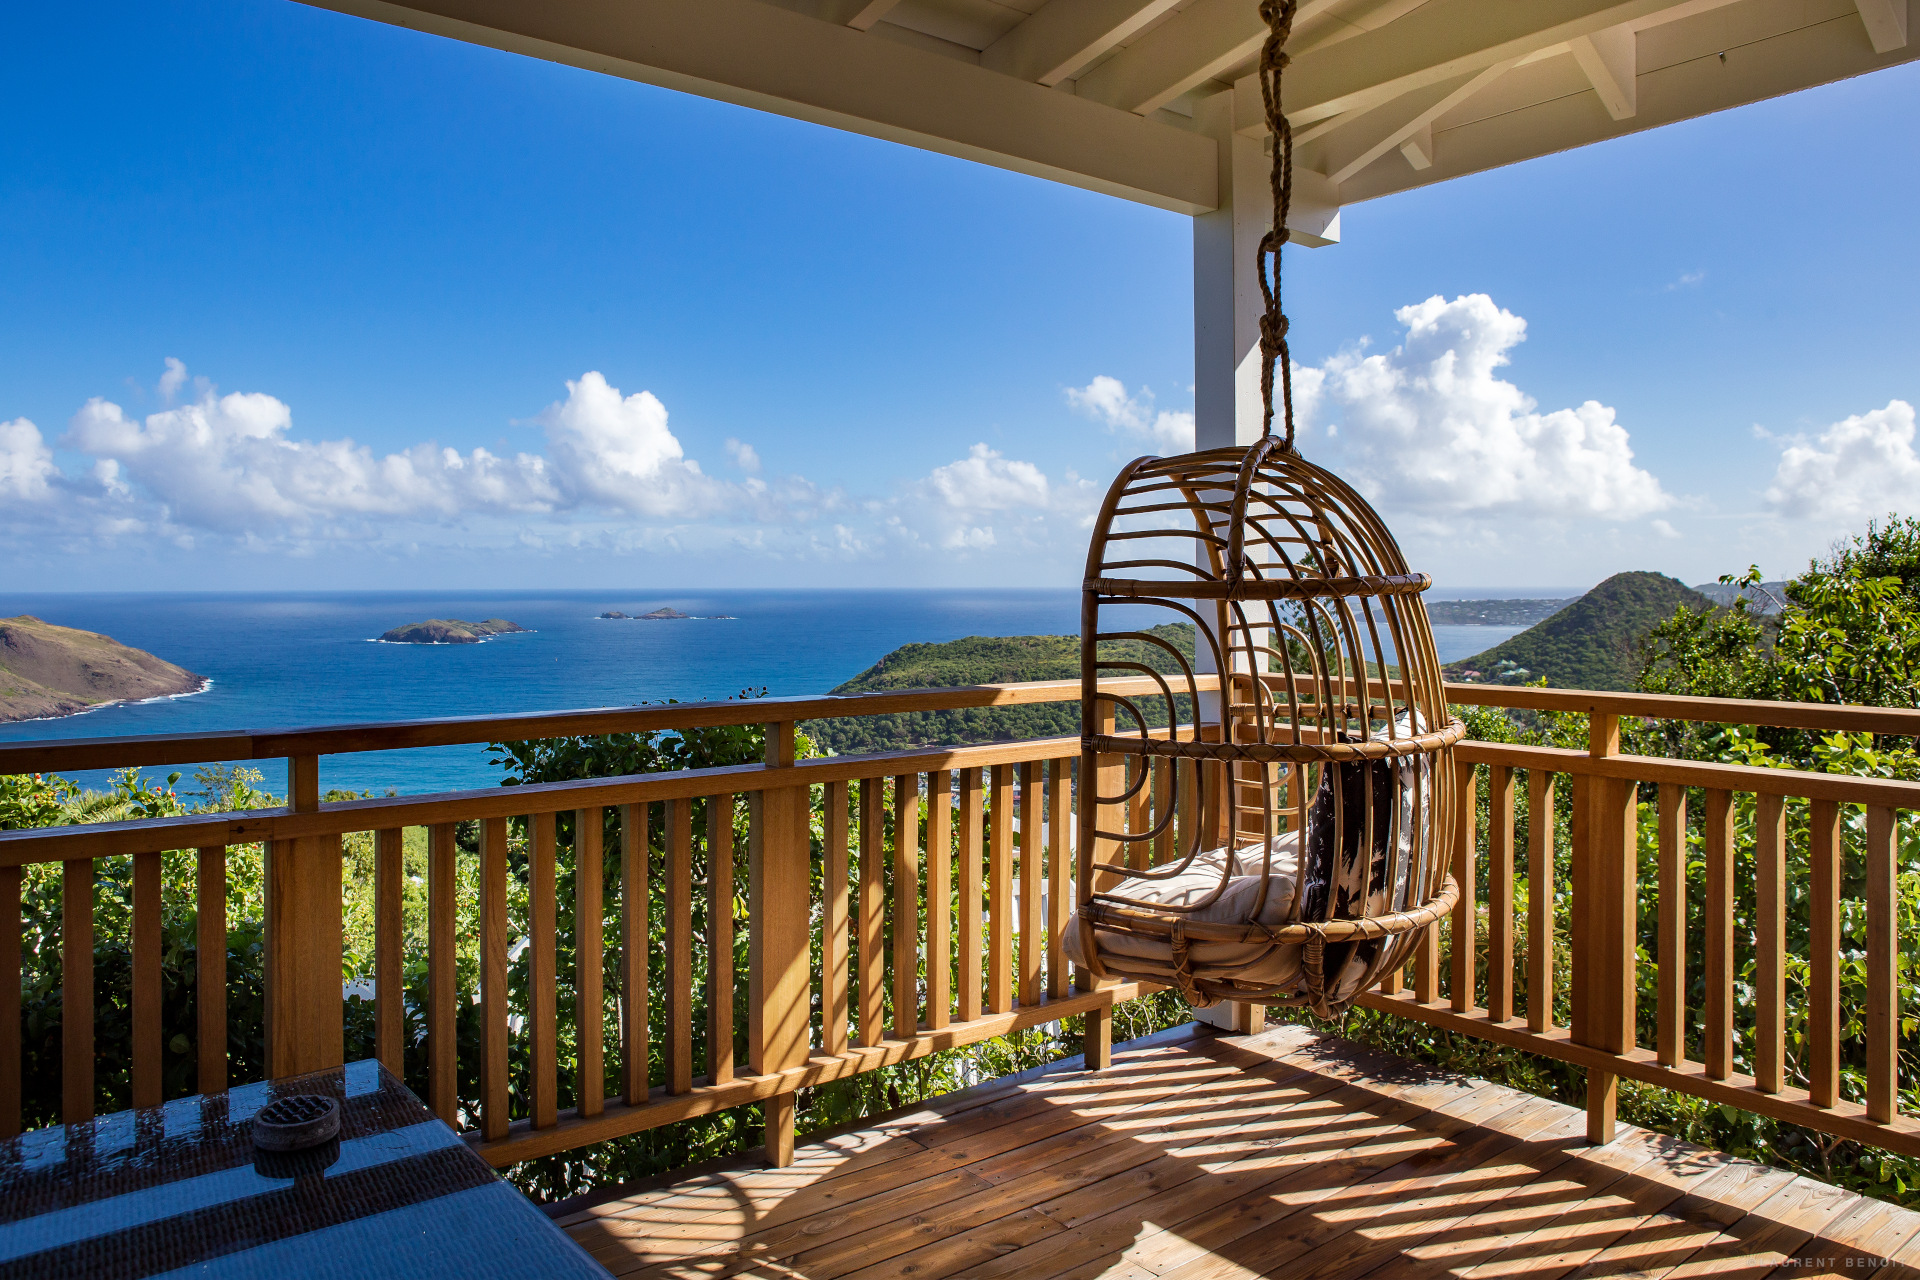 The Best Hotels in Blissful St Barths